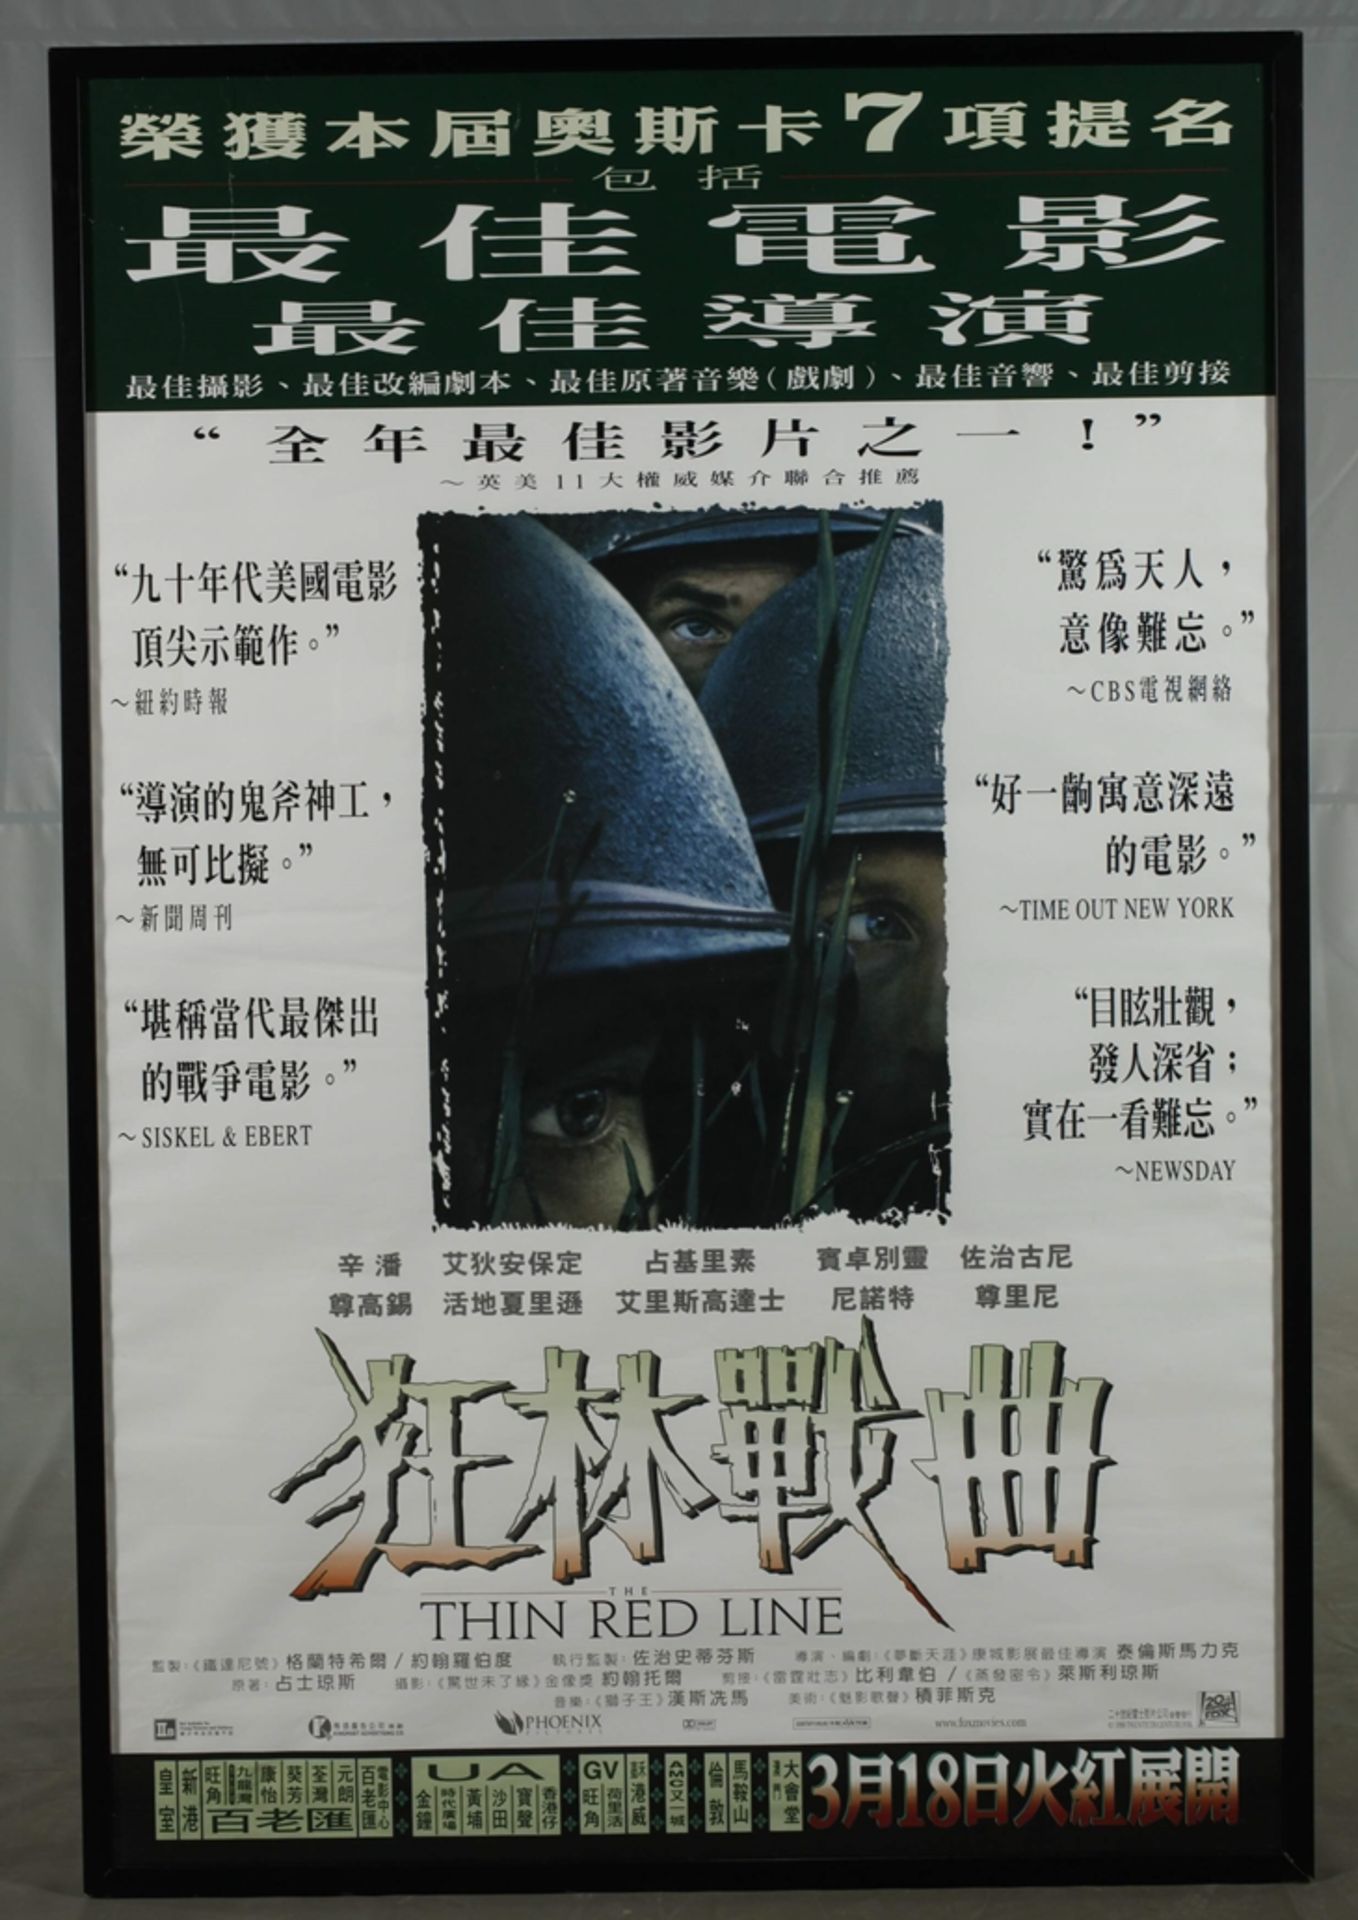 Film poster - Image 2 of 3